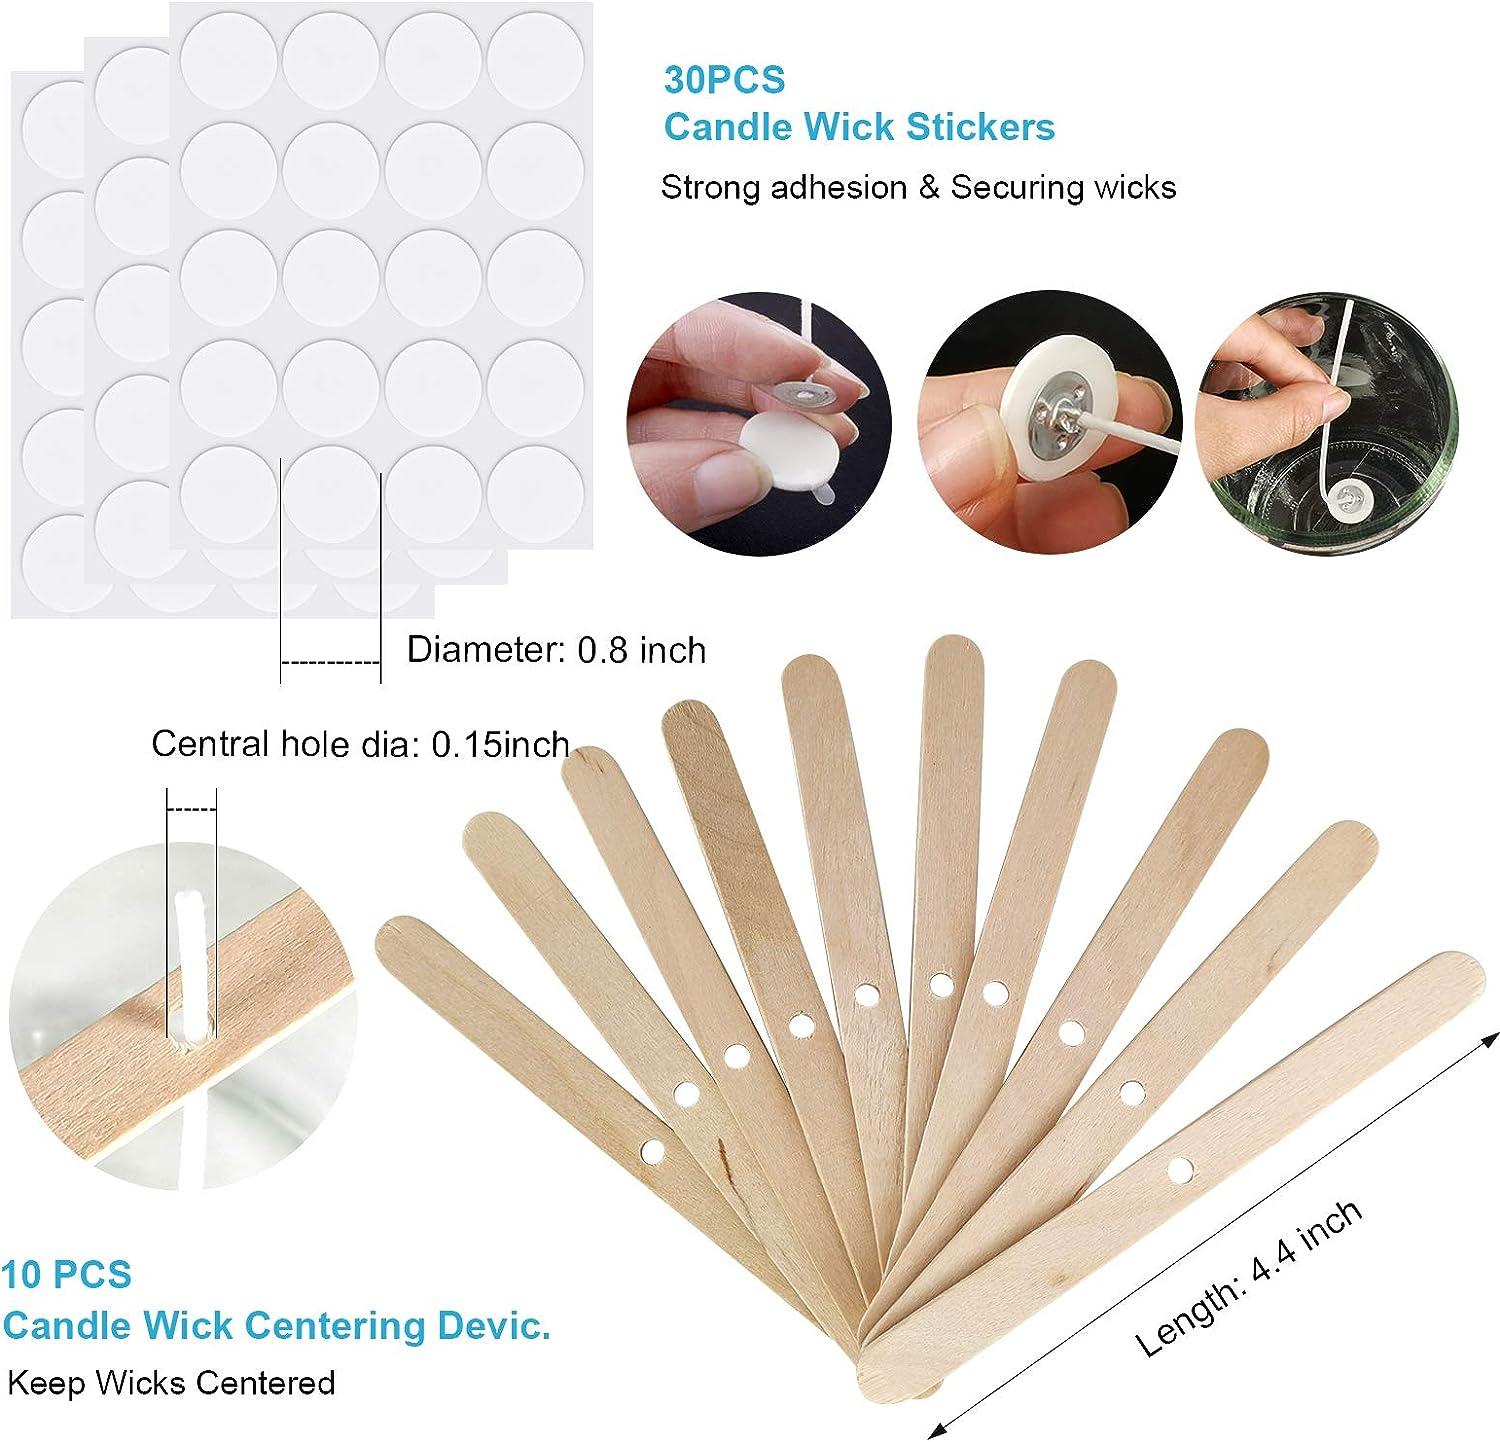 Candle Wicks 100 Pcs 6 inch with 30Pcs Candle Wick Stickers and 10 Pcs  Wooden Candle Wick Centering Device for Soy Beeswax Candle Making and  Candle DIY